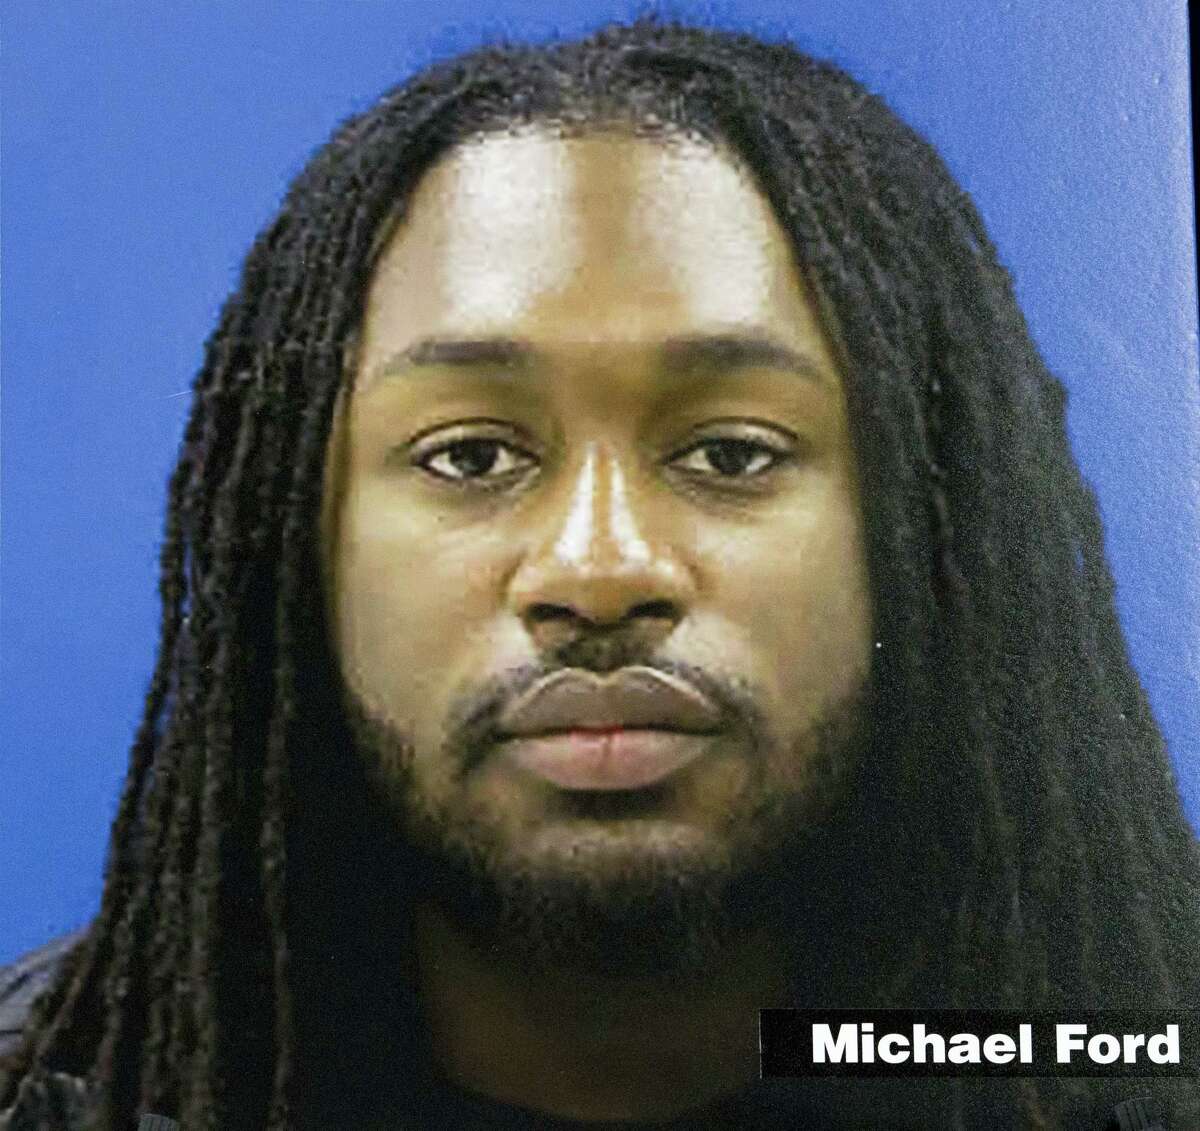 This image provided by the State of Maryland shows Michael Ford, one of the three suspects involved in the shooting of Prince George’s County police officer Jacai Colson. The gunman, Michael Ford, 22, was expected to survive, along with his brothers Malik, 21, and Elijah, 18. All three have been arrested and will face dozens of charges among them, according to police.